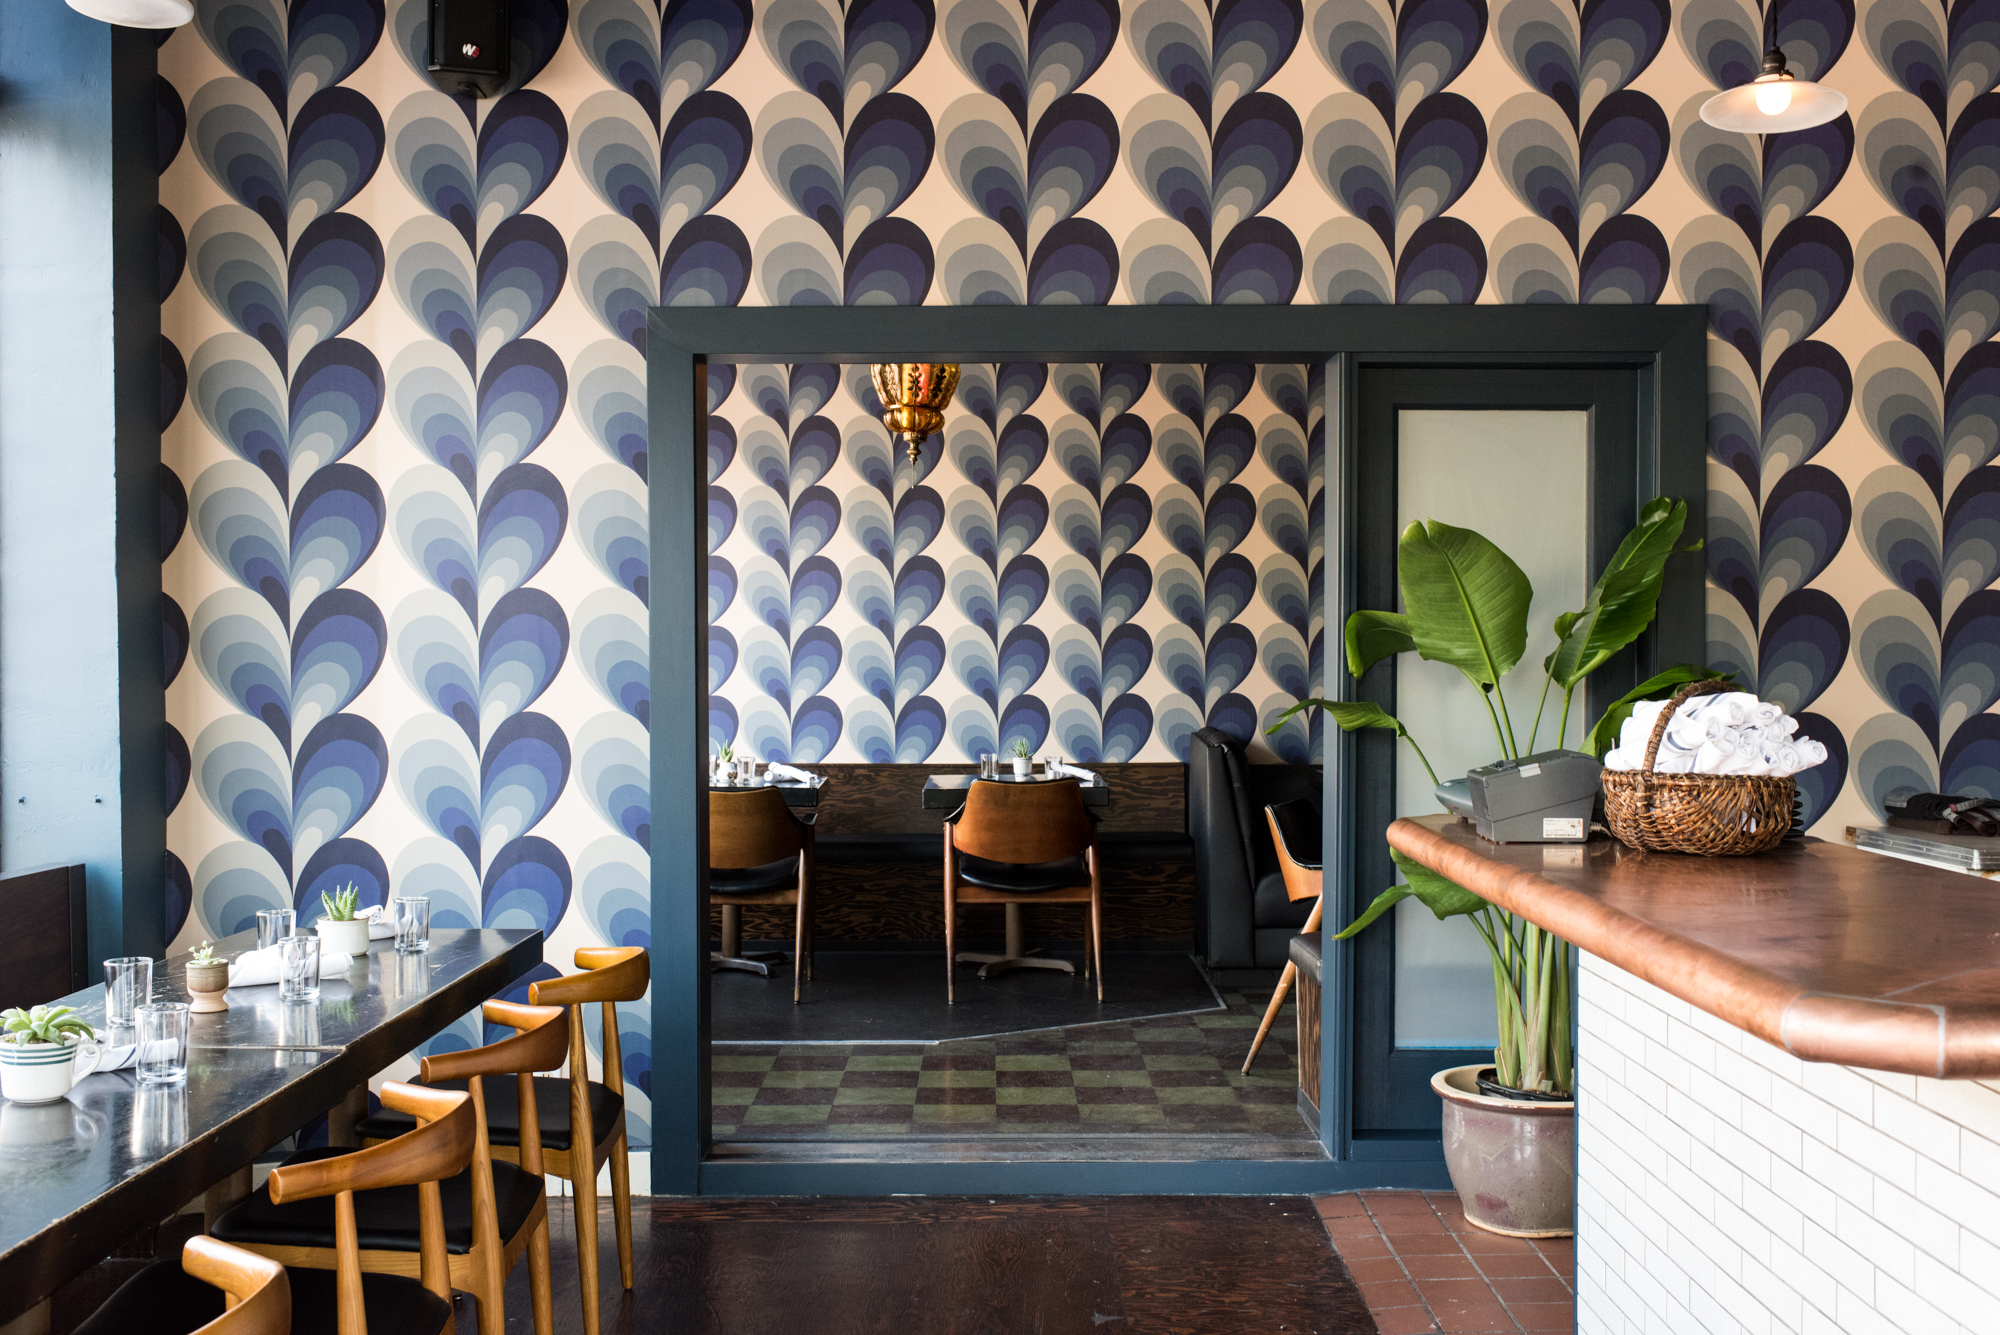 An empty restaurant dining room with blue-patterned wallpaper.